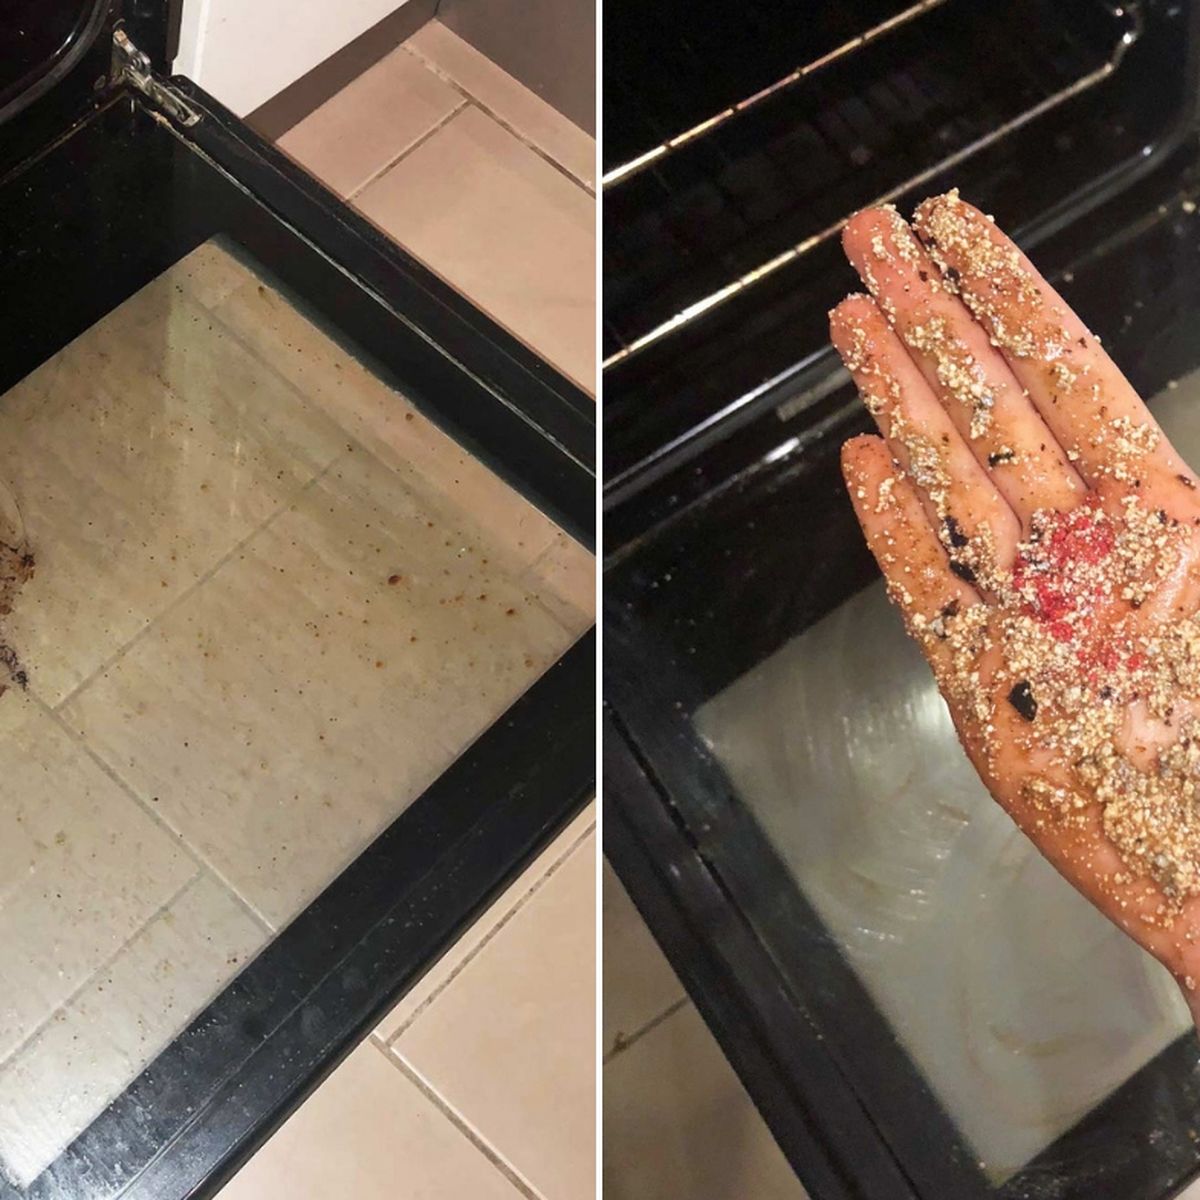 The savvy £1.99 oven cleaning hack that is wowing the internet